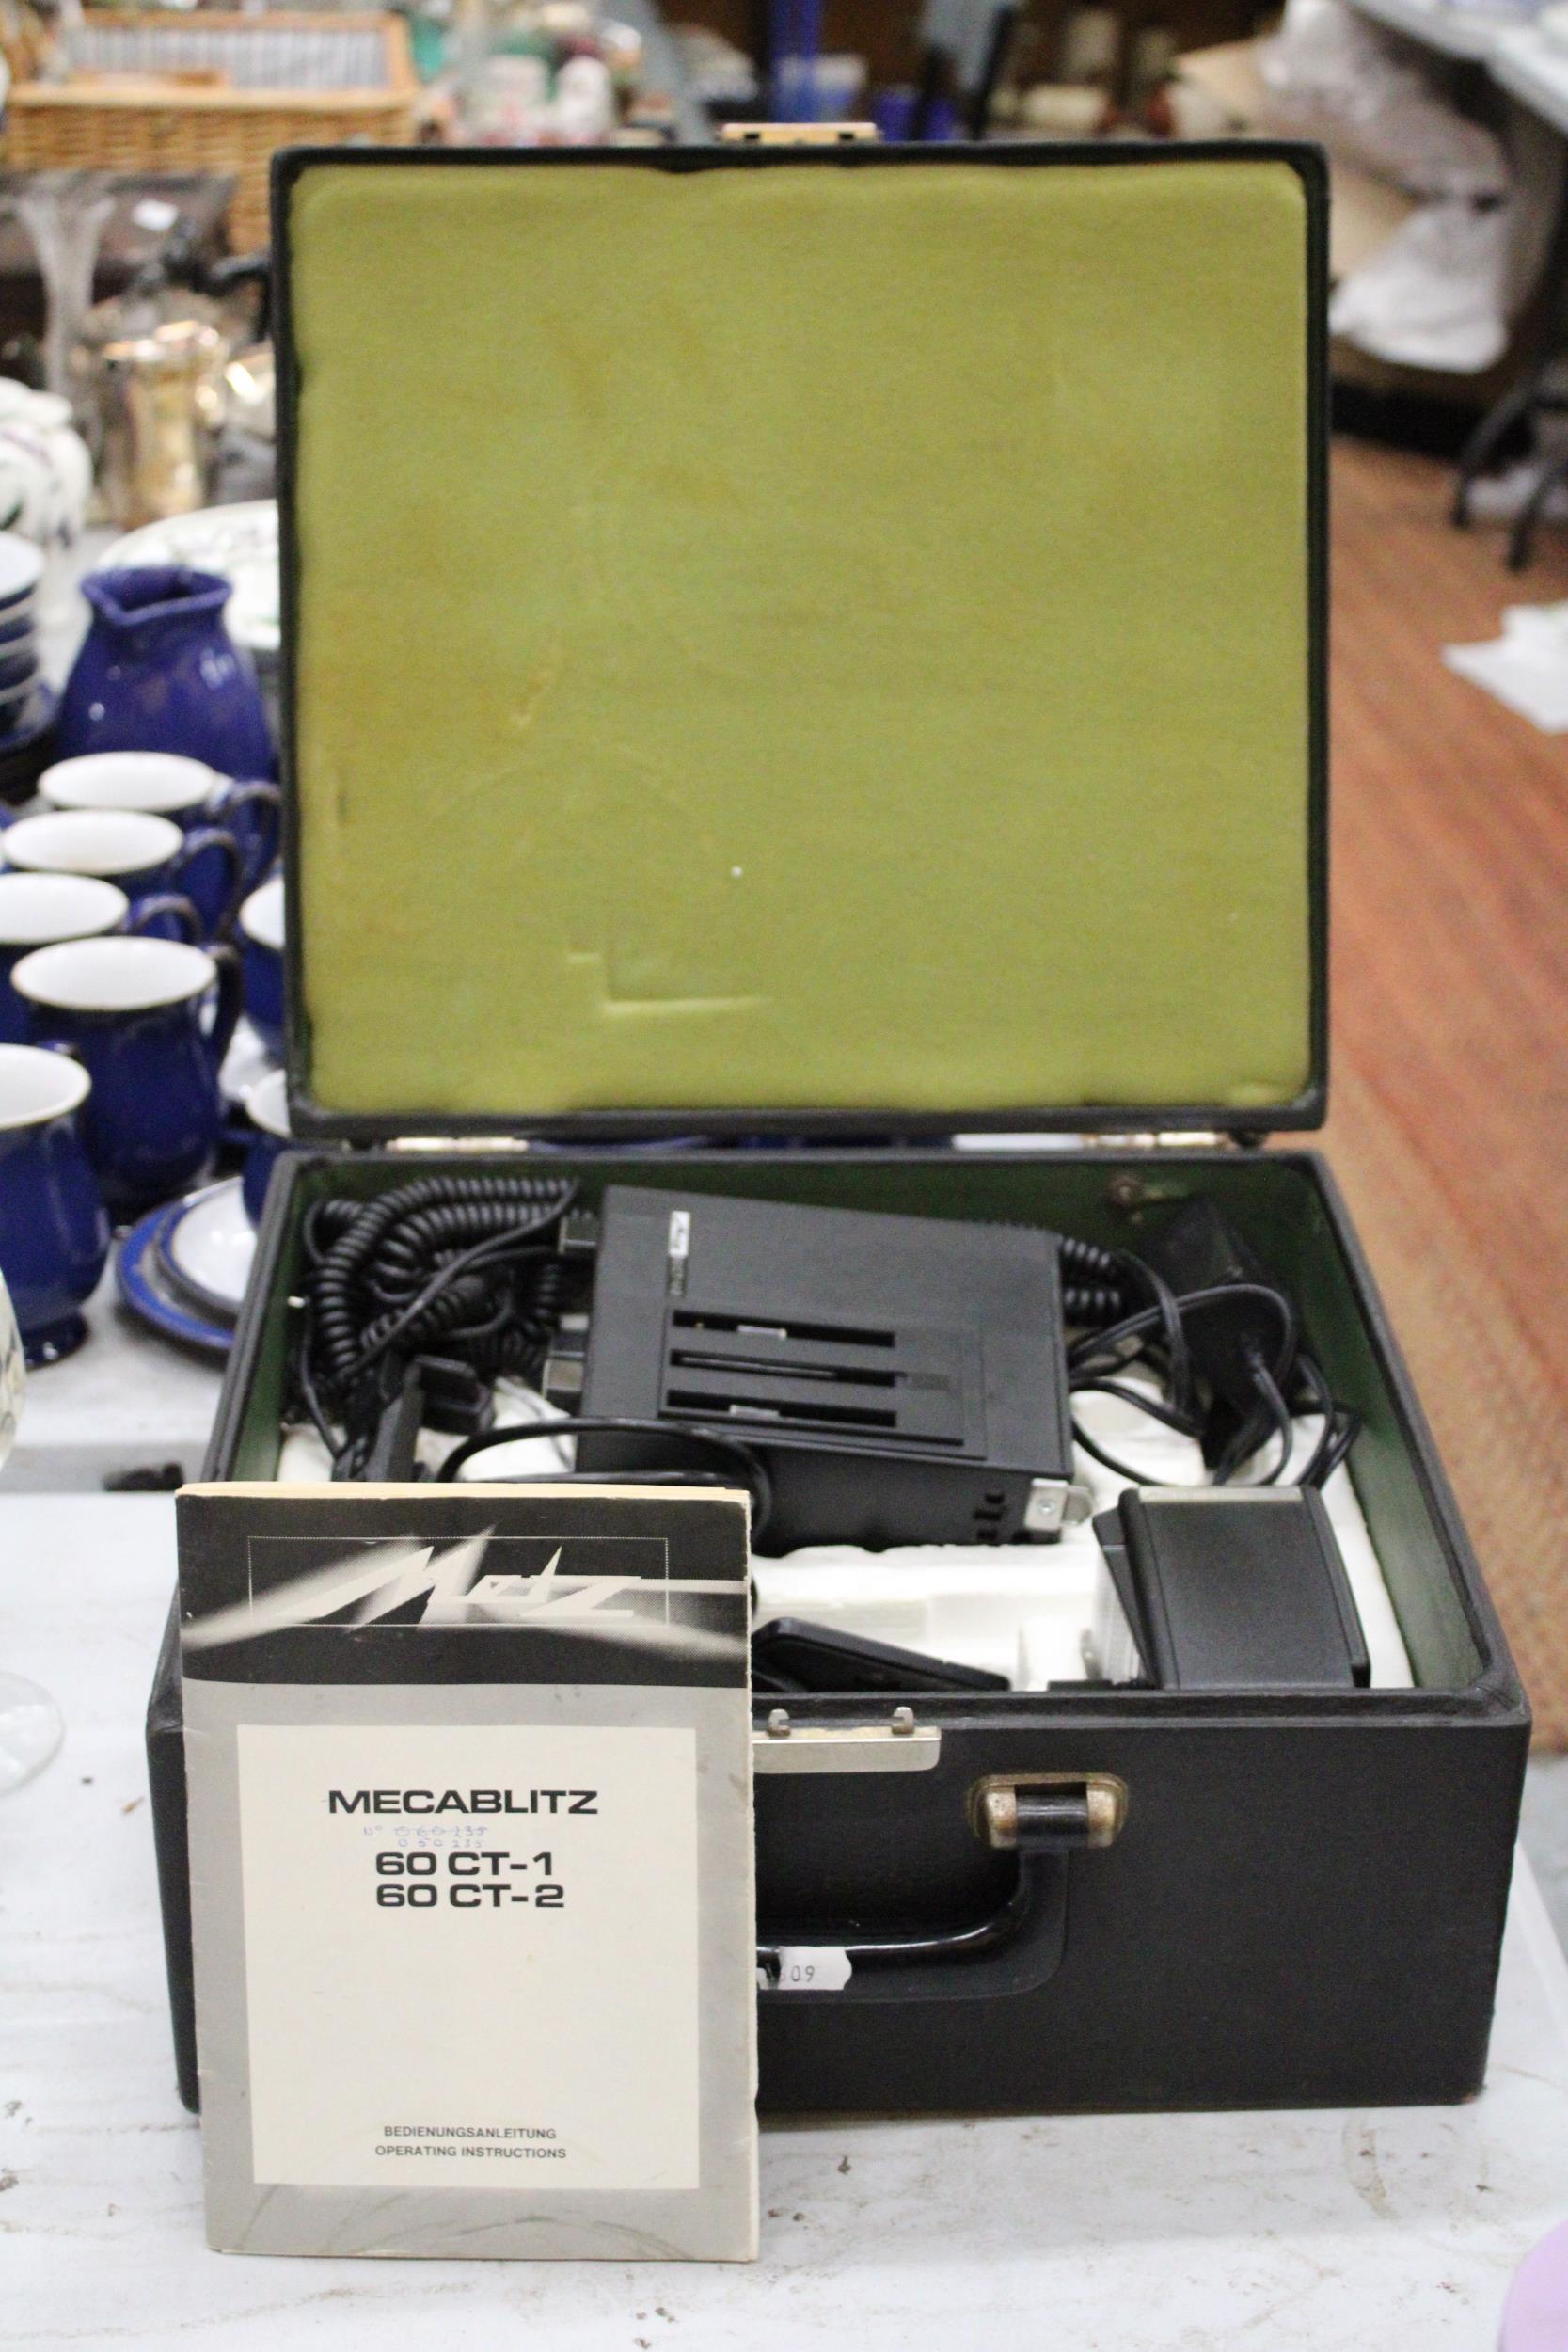 A VINTAGE 'MECABLITZ' 60 CT 2 FLASH UNIT WITH ACCESSORIES AND OPERATING INSTRUCTIONS, IN ORIGINAL